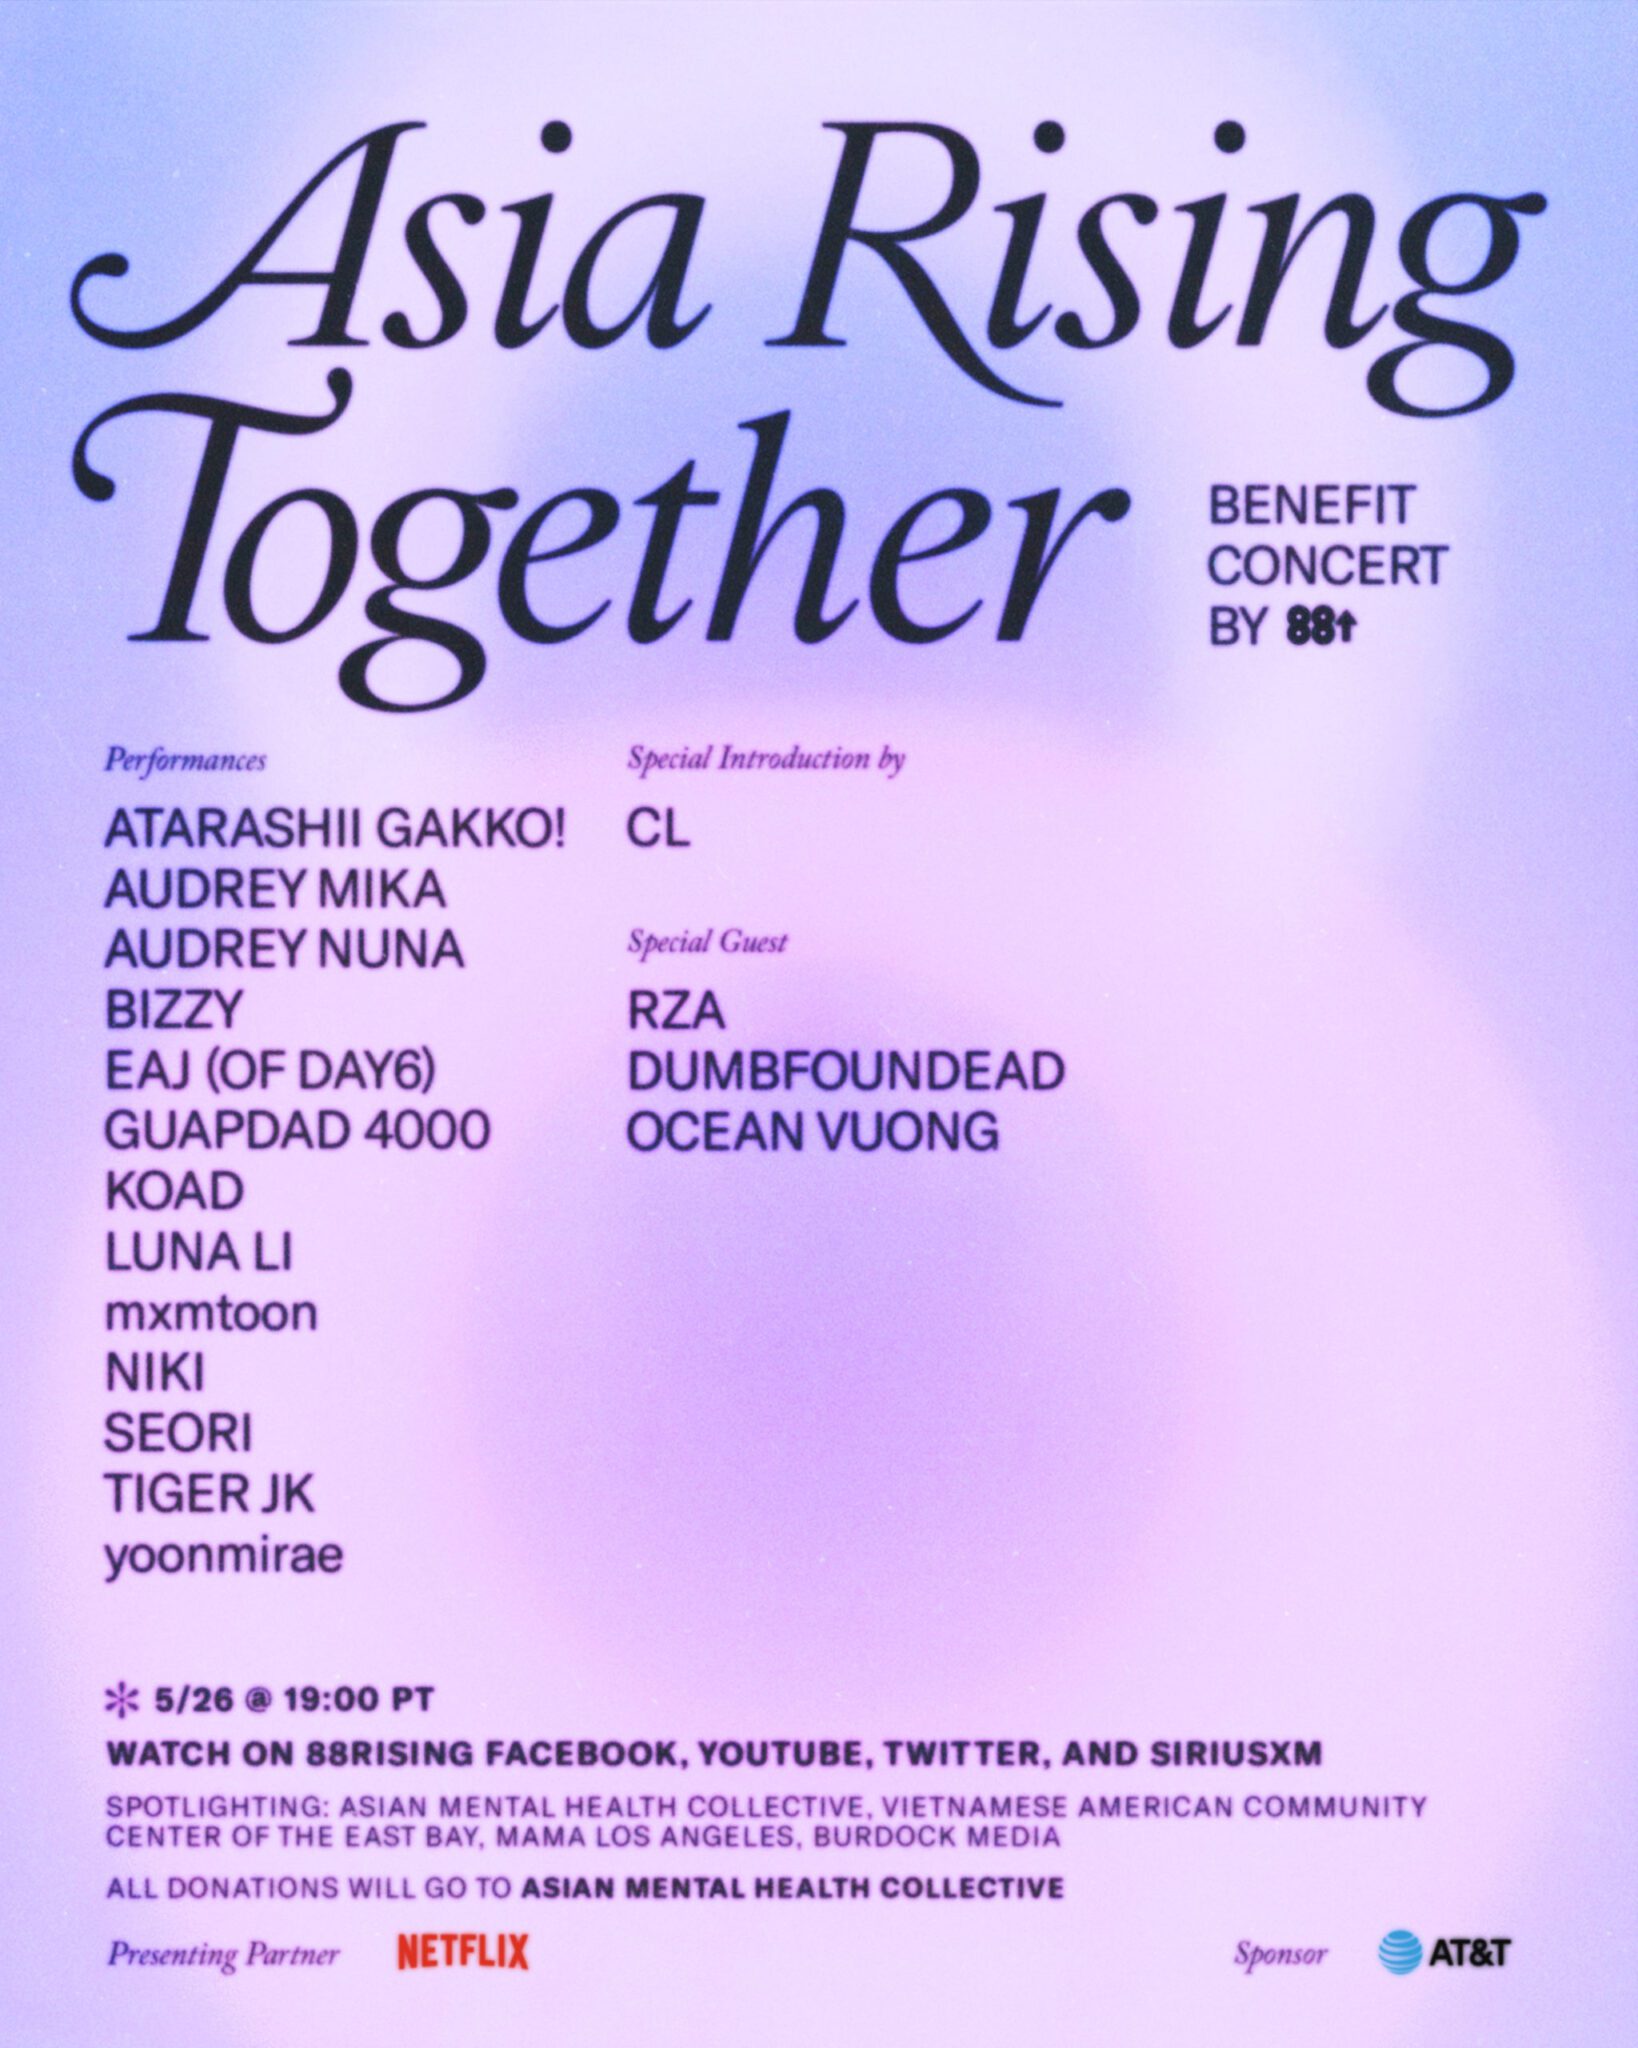 Asia Rising Together Benefit Concert